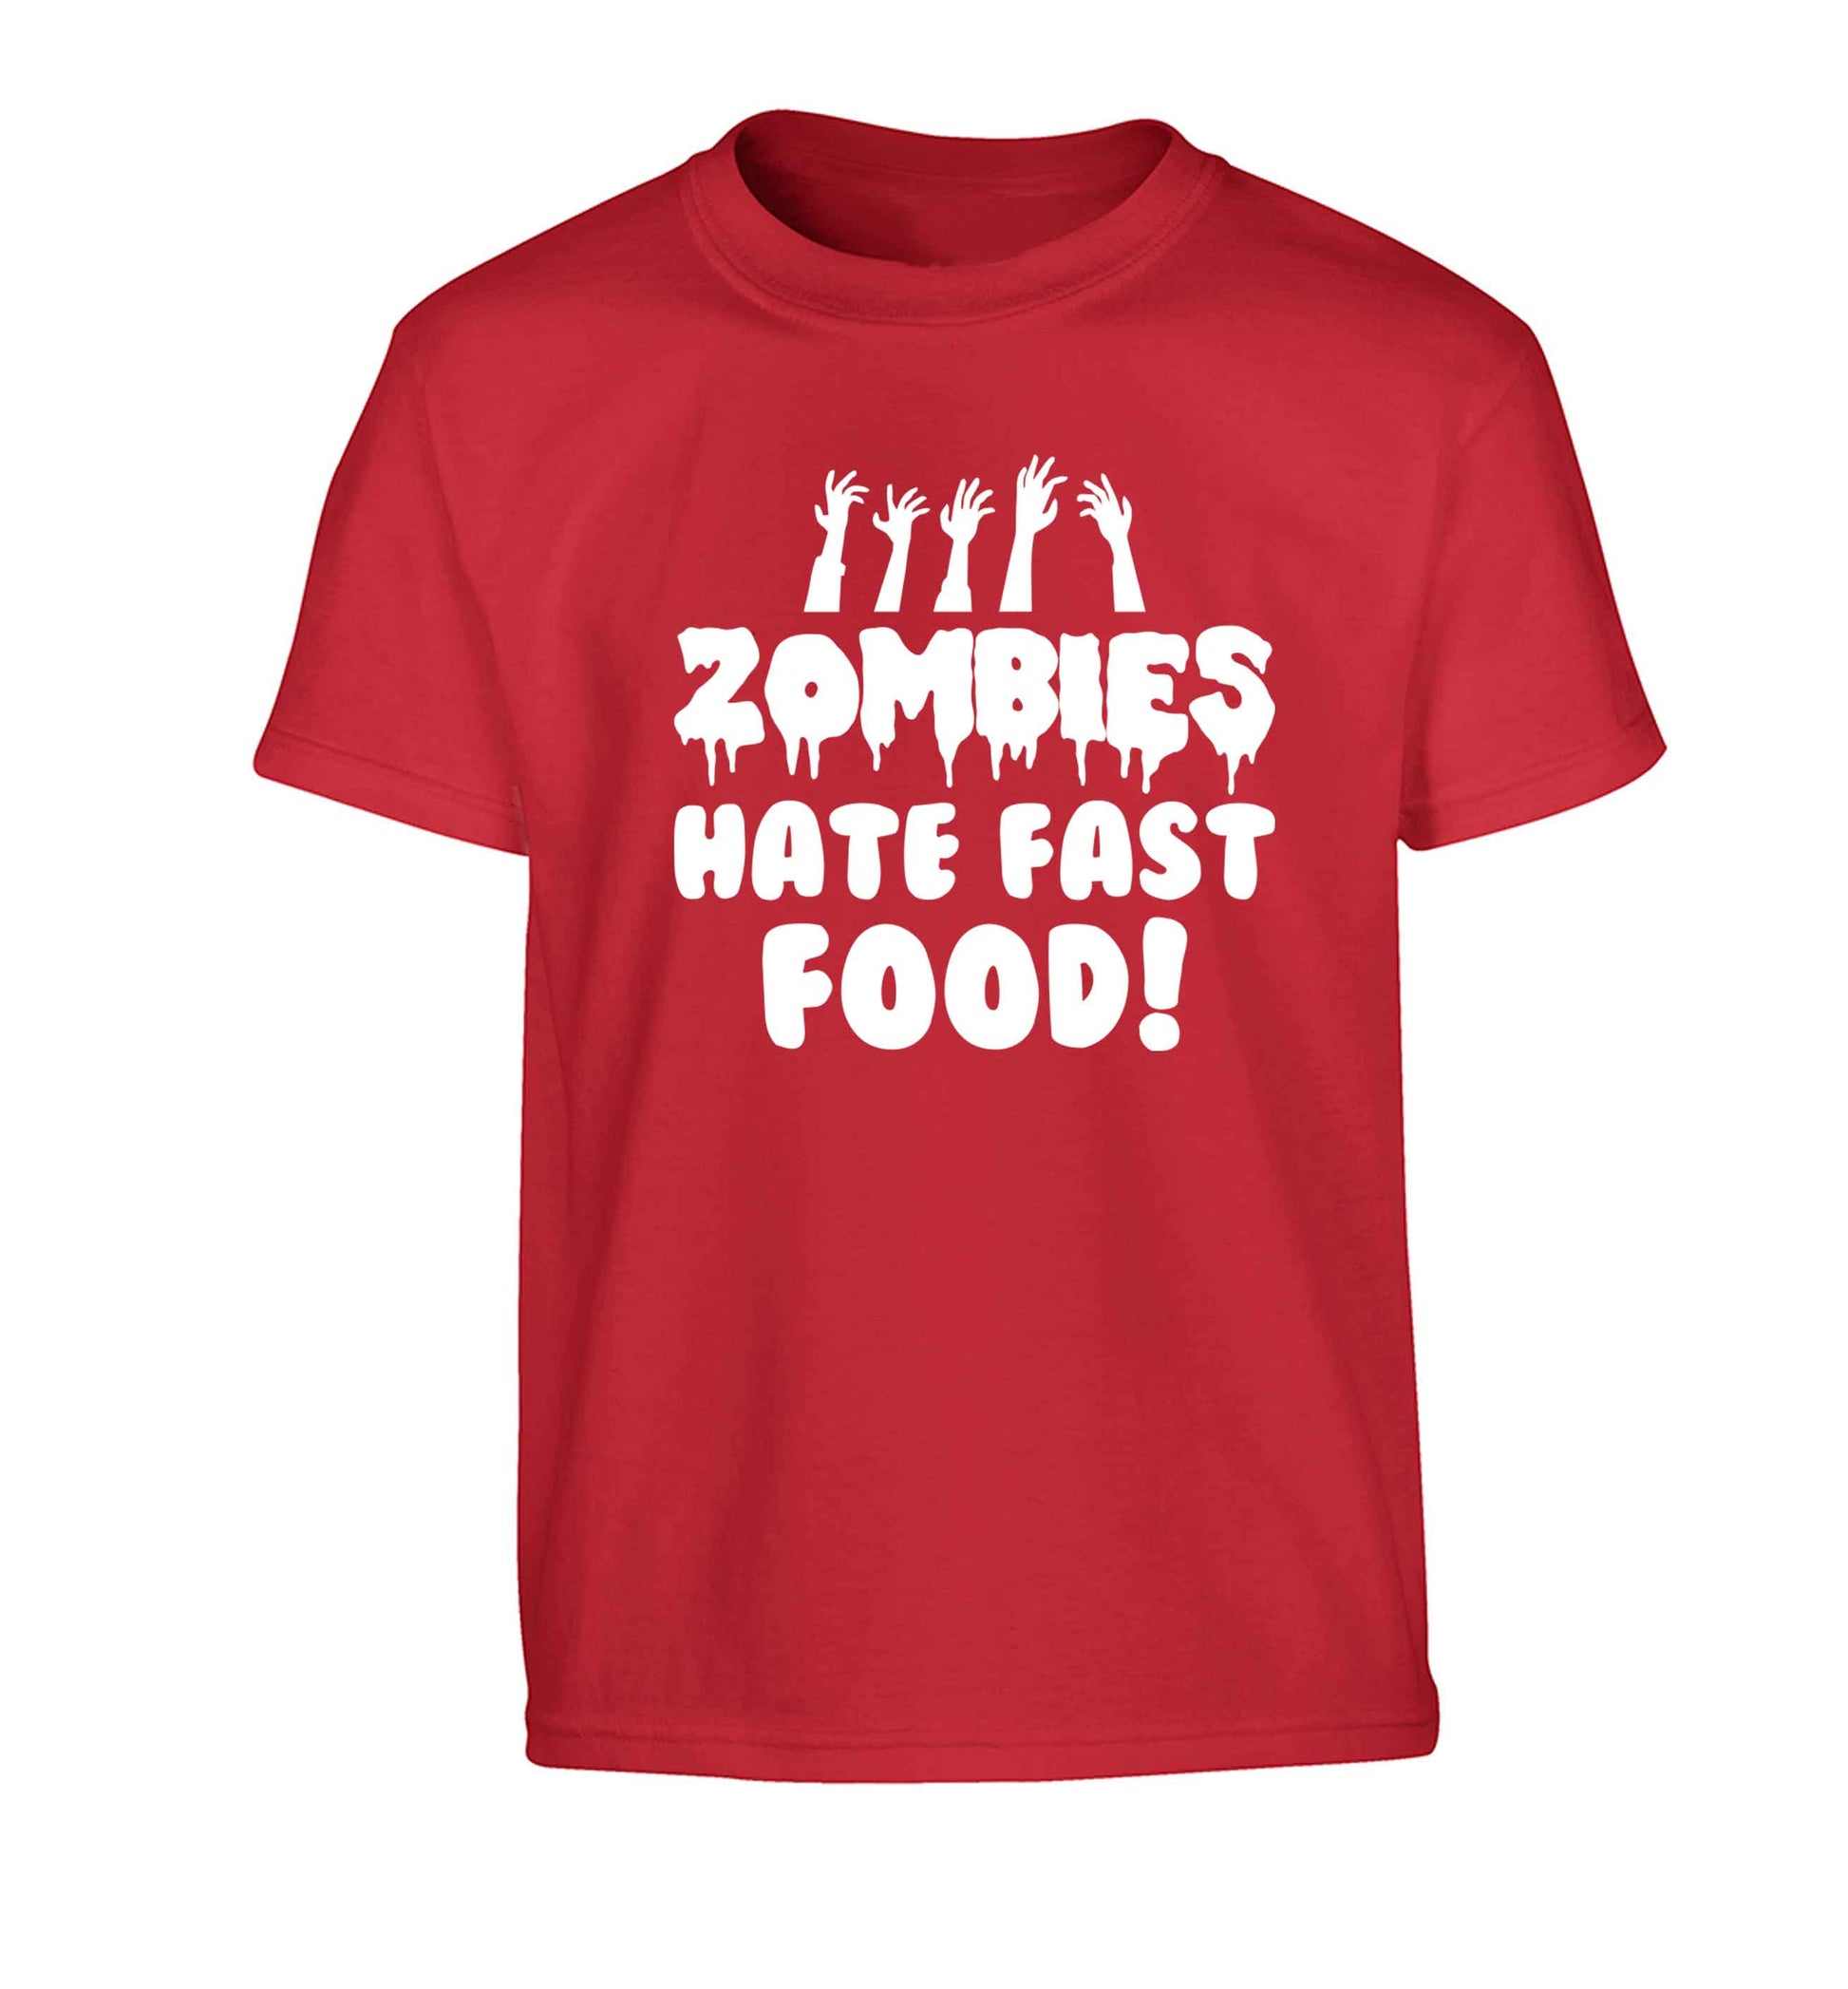 Zombies hate fast food Children's red Tshirt 12-13 Years